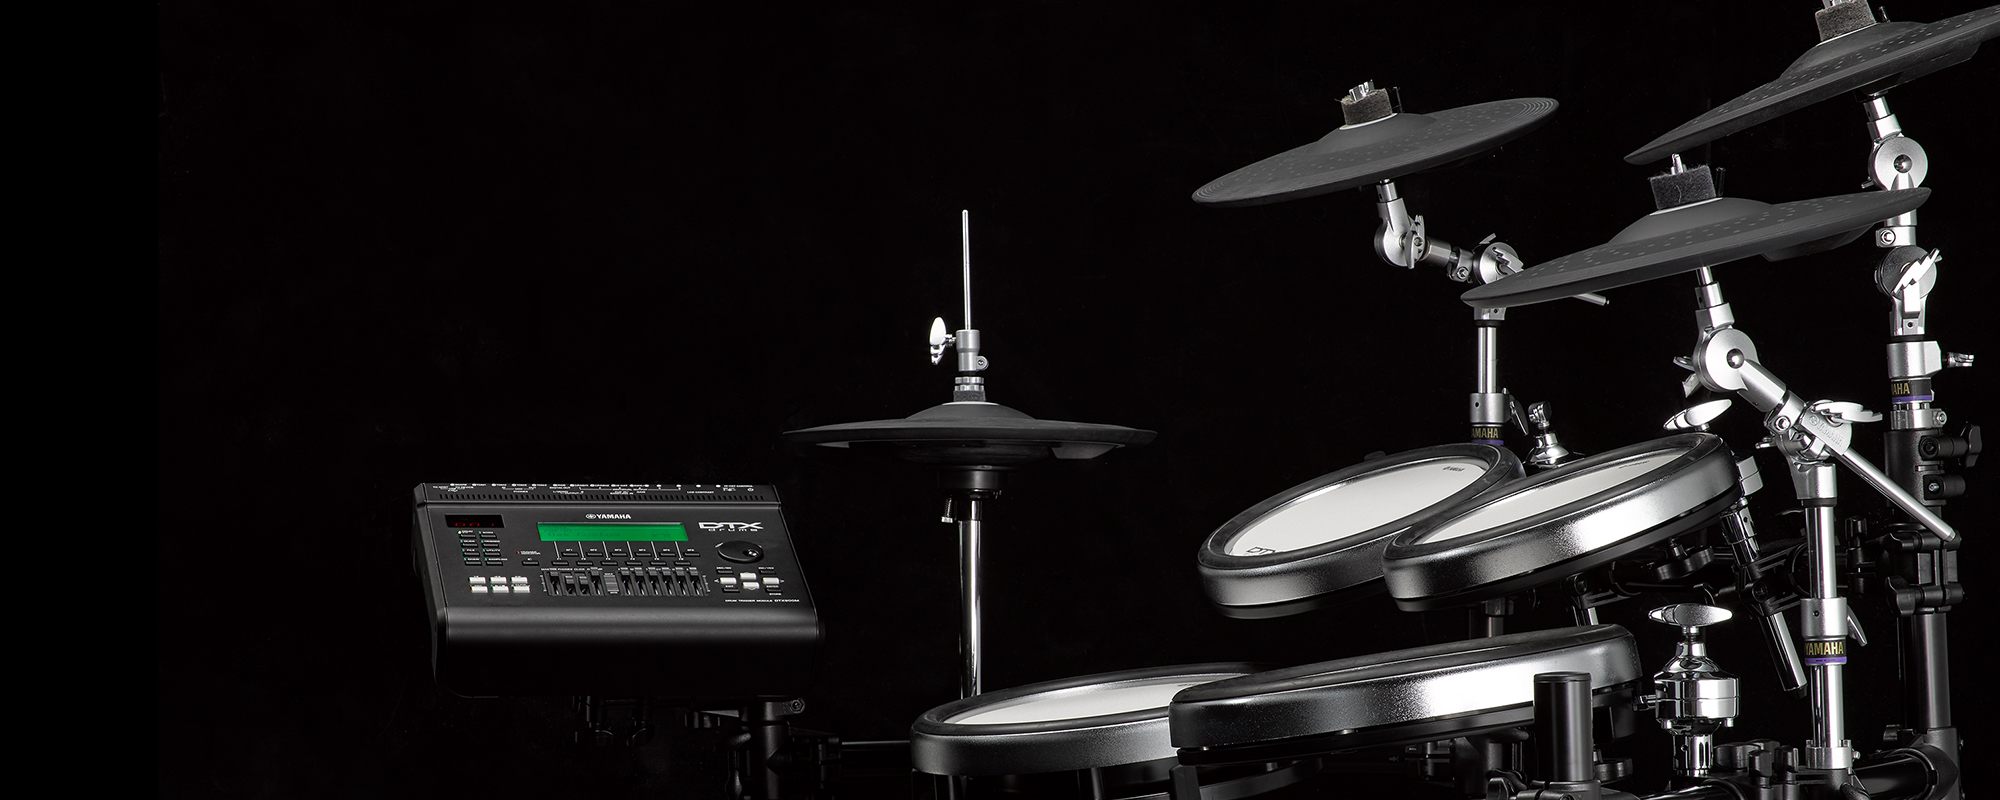 DTX900 Series - Overview - Electronic Drum Kits - DTX Electronic 